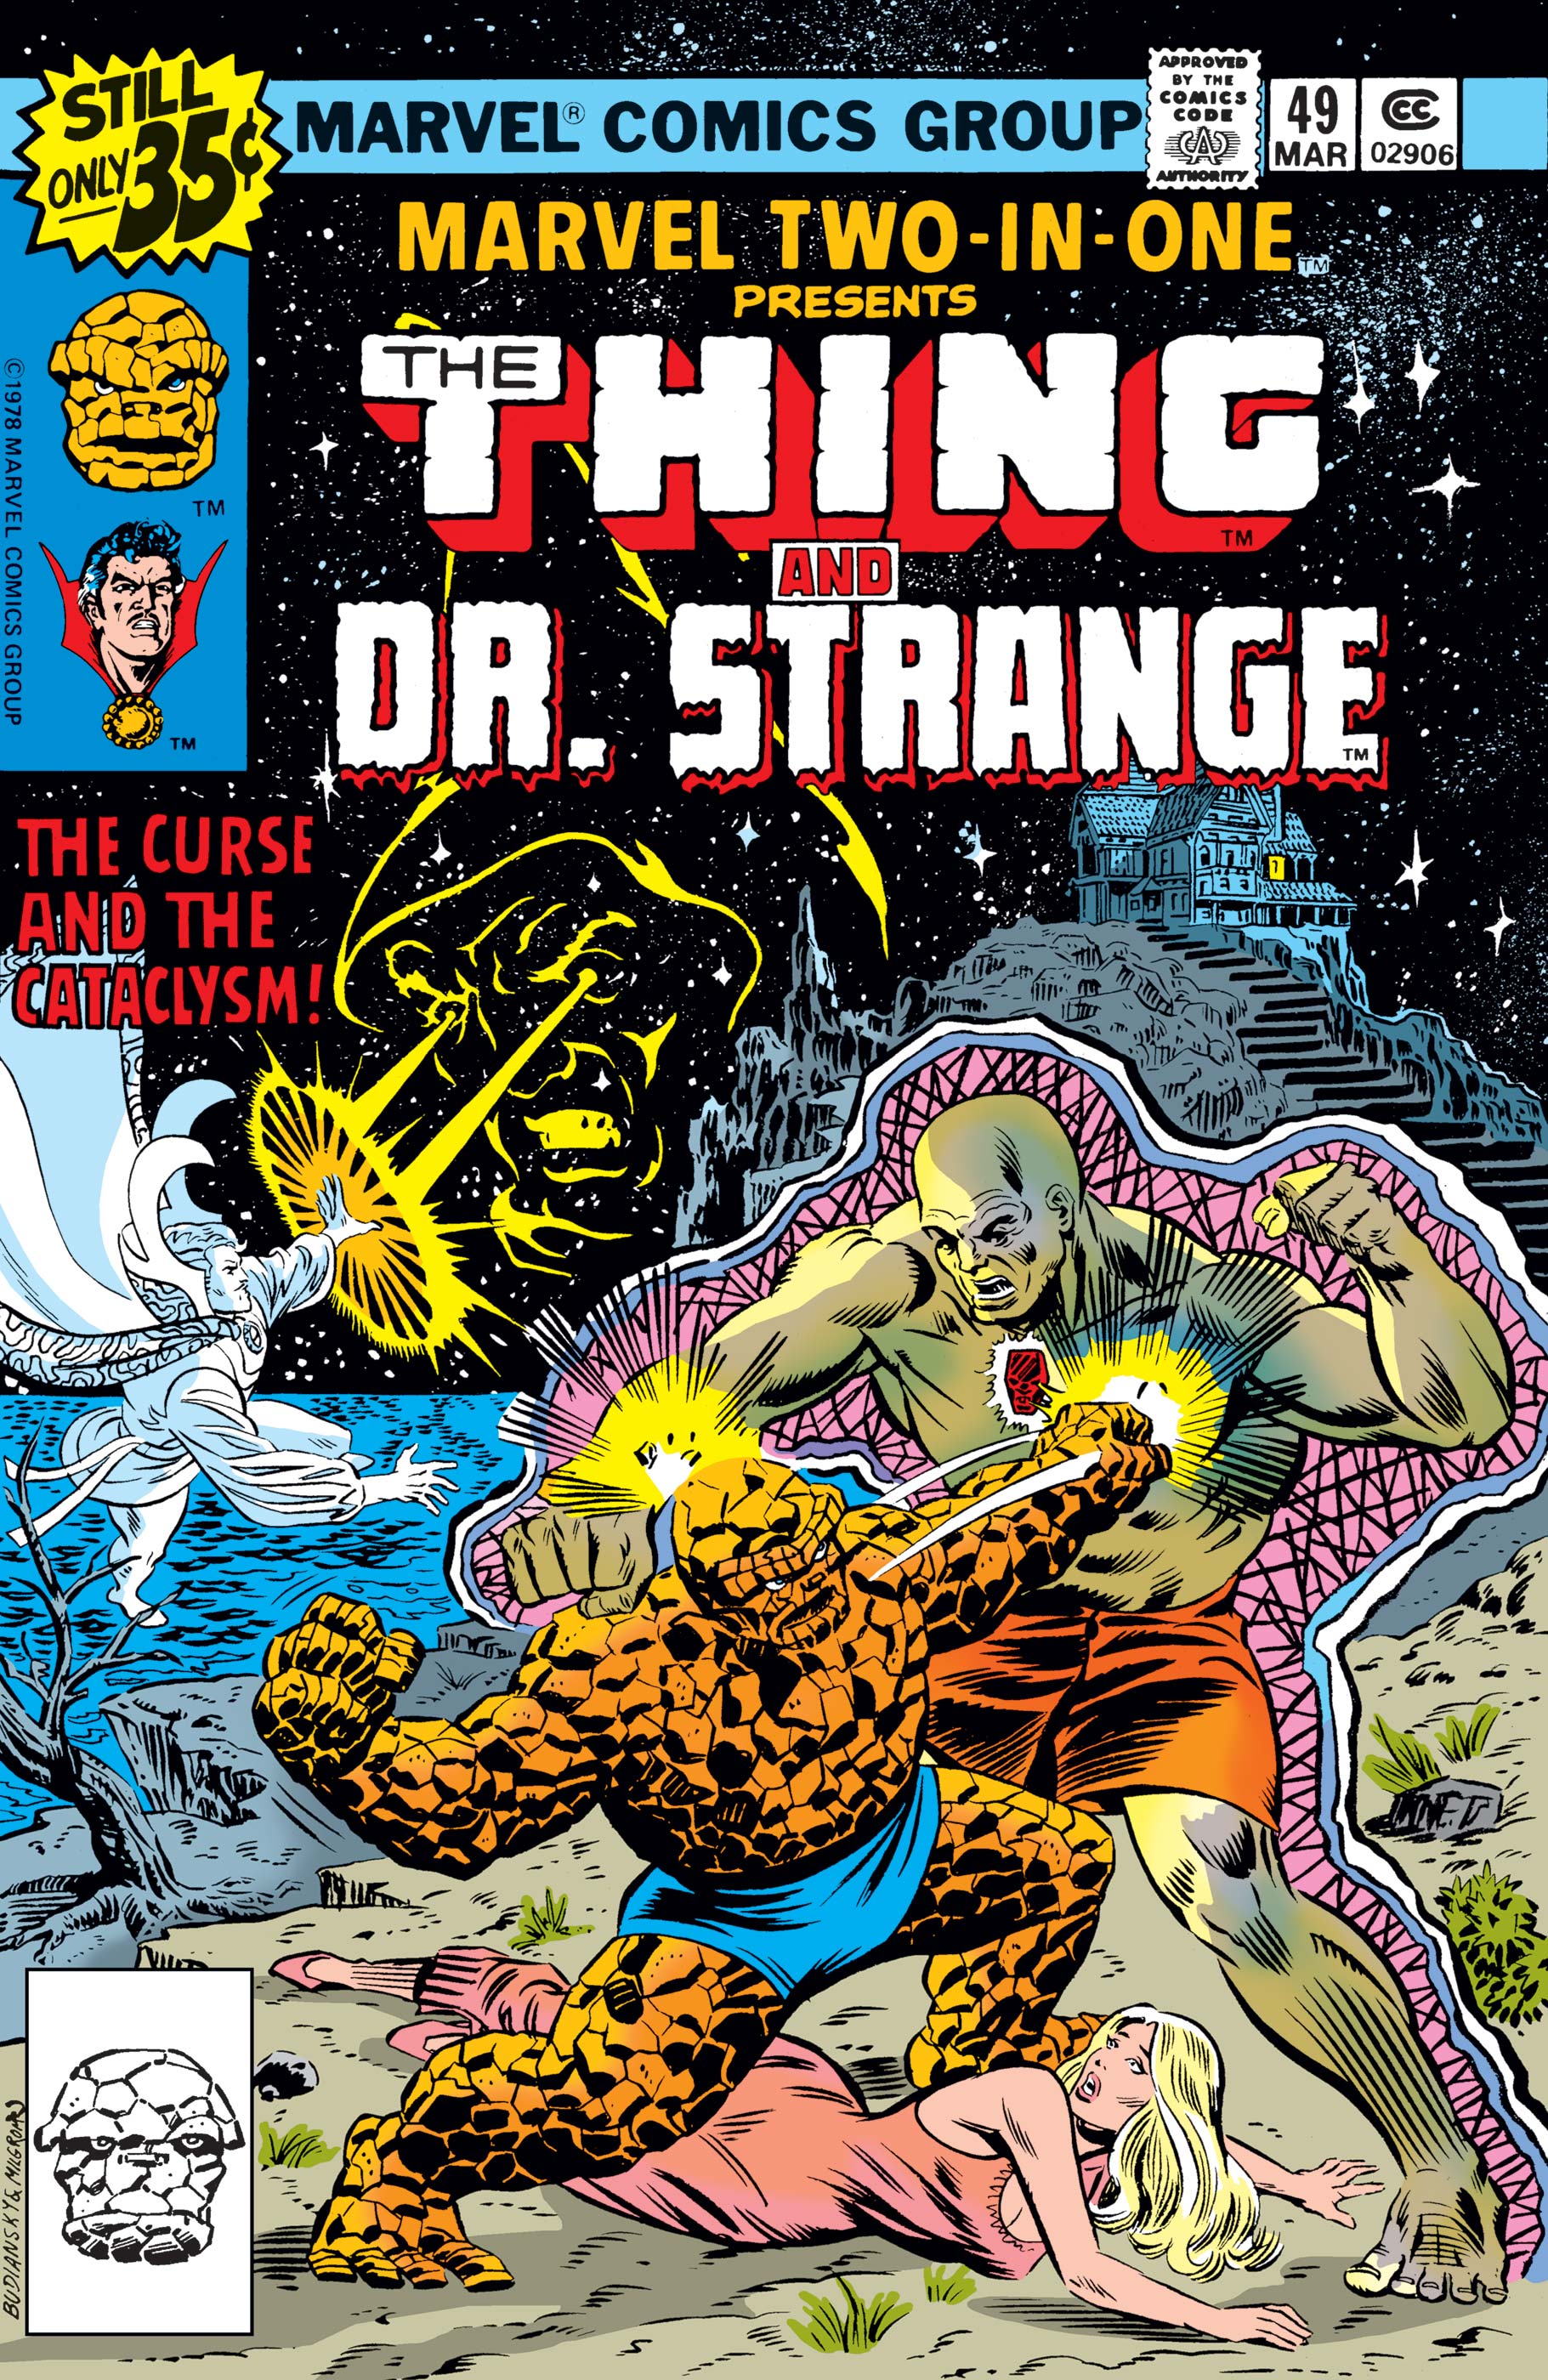 Marvel Two-in-One (1974) #49